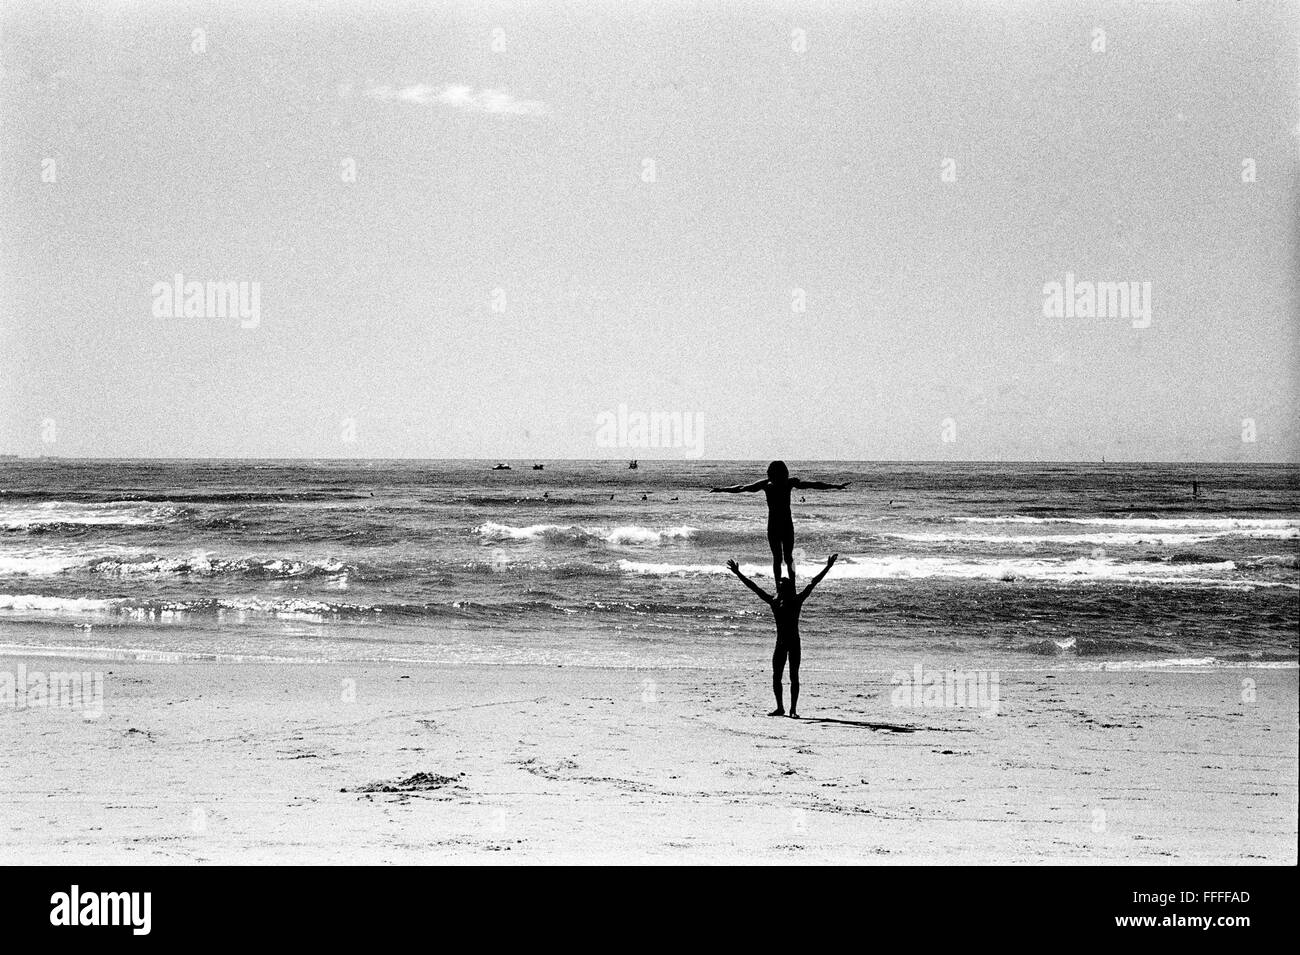 Jan 4, 2016 - South Beach, KwaZulu-Natal, South Africa - Two acrobats from Tanzania who are on their way to a better life in Europe, say that the beach is a good place to practice their craft and have a wash. South Beach is a part of the City of Durban's longest uninterrupted stretch of beach sand. The City of Durban is on the eastern seaboard of South Africa and the people here are washed with the warm waters of the Indian Ocean. To the north of this stretch of sand are beaches with cafe society hang outs. To the south there is a pier with the upmarket Moyo's Restaurant at it's end and the uS Stock Photo